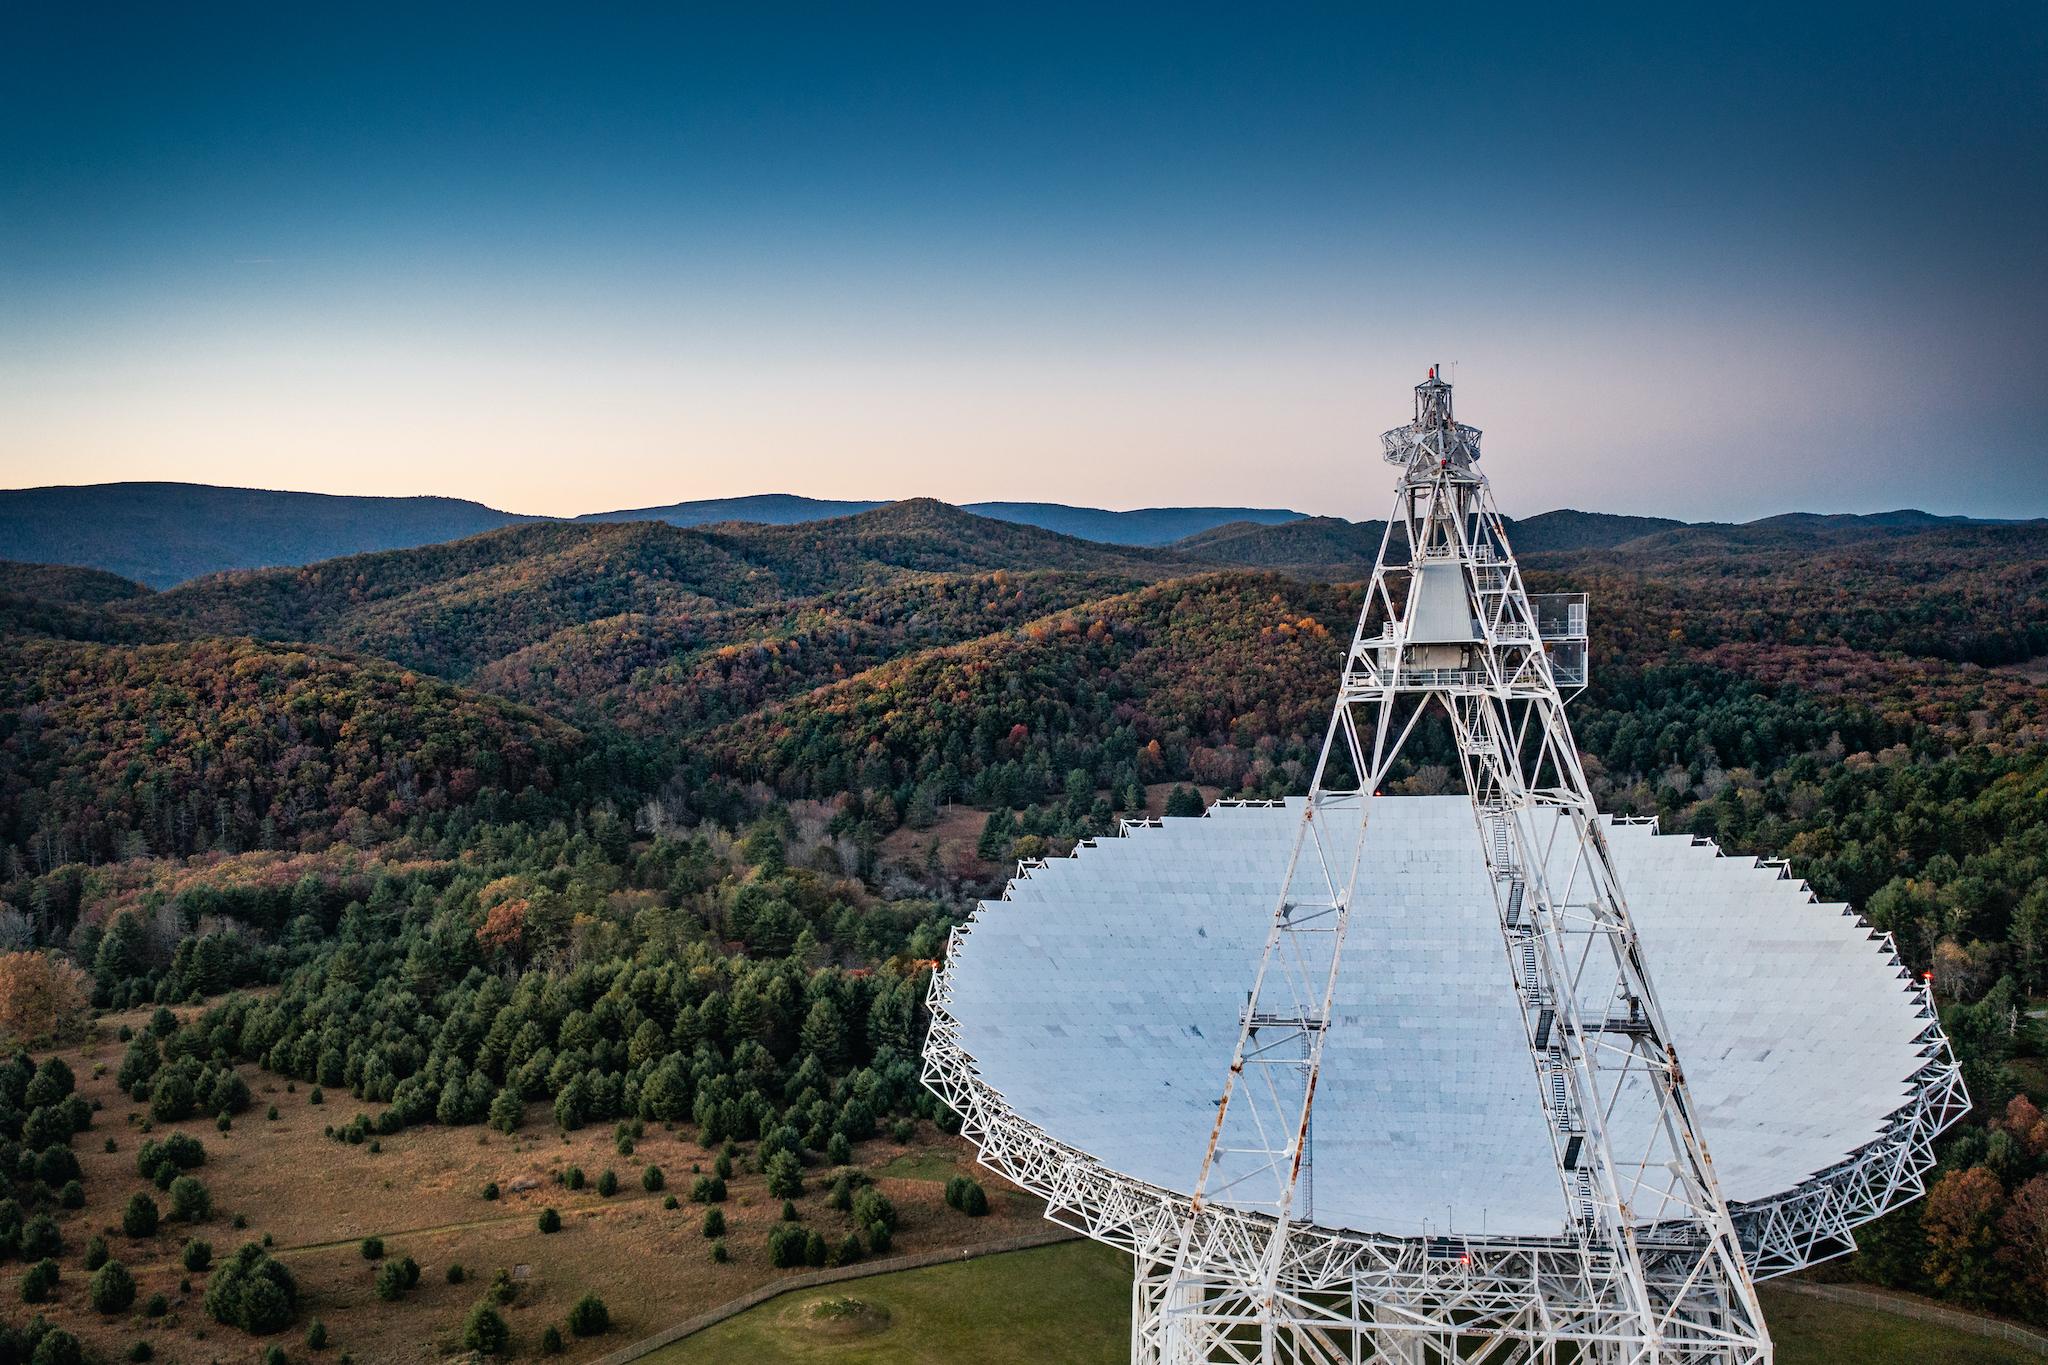 The massive Green Bank Telescope points to the sky, picking up observations in part of a cosmic puzzle researchers try to solve